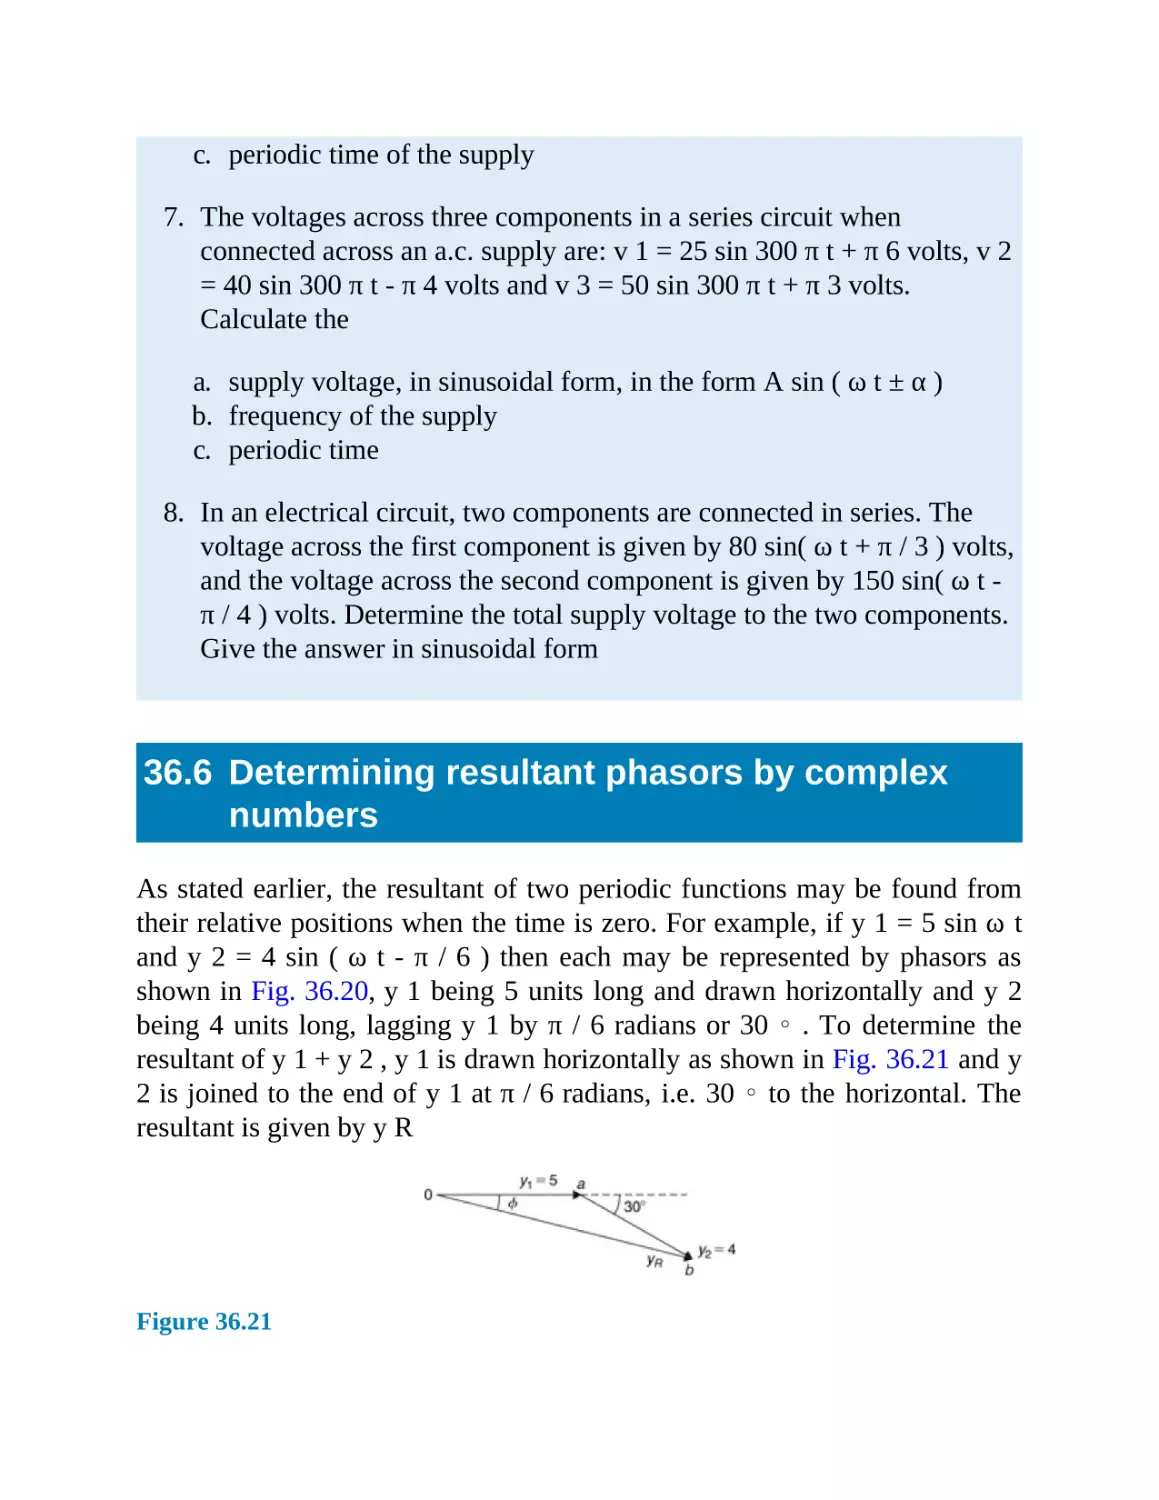 36.6 Determining resultant phasors by complex numbers